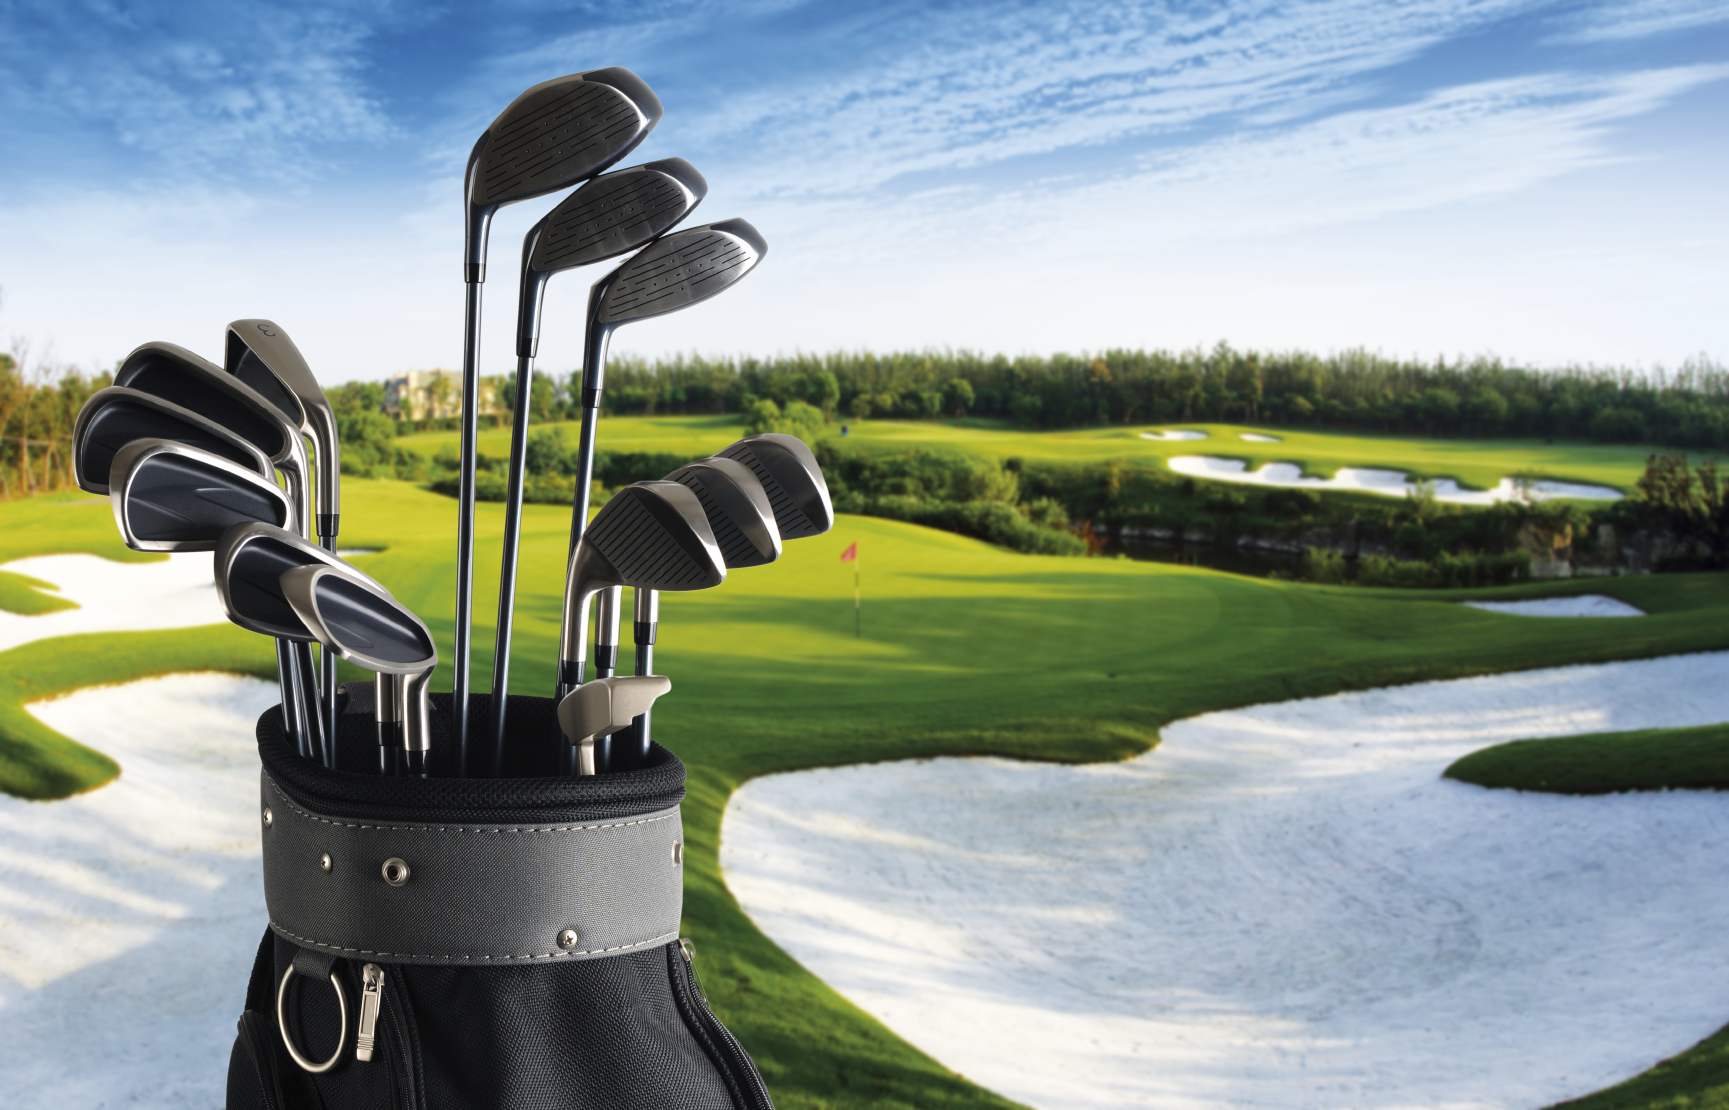 How to sanitise your golf equipment